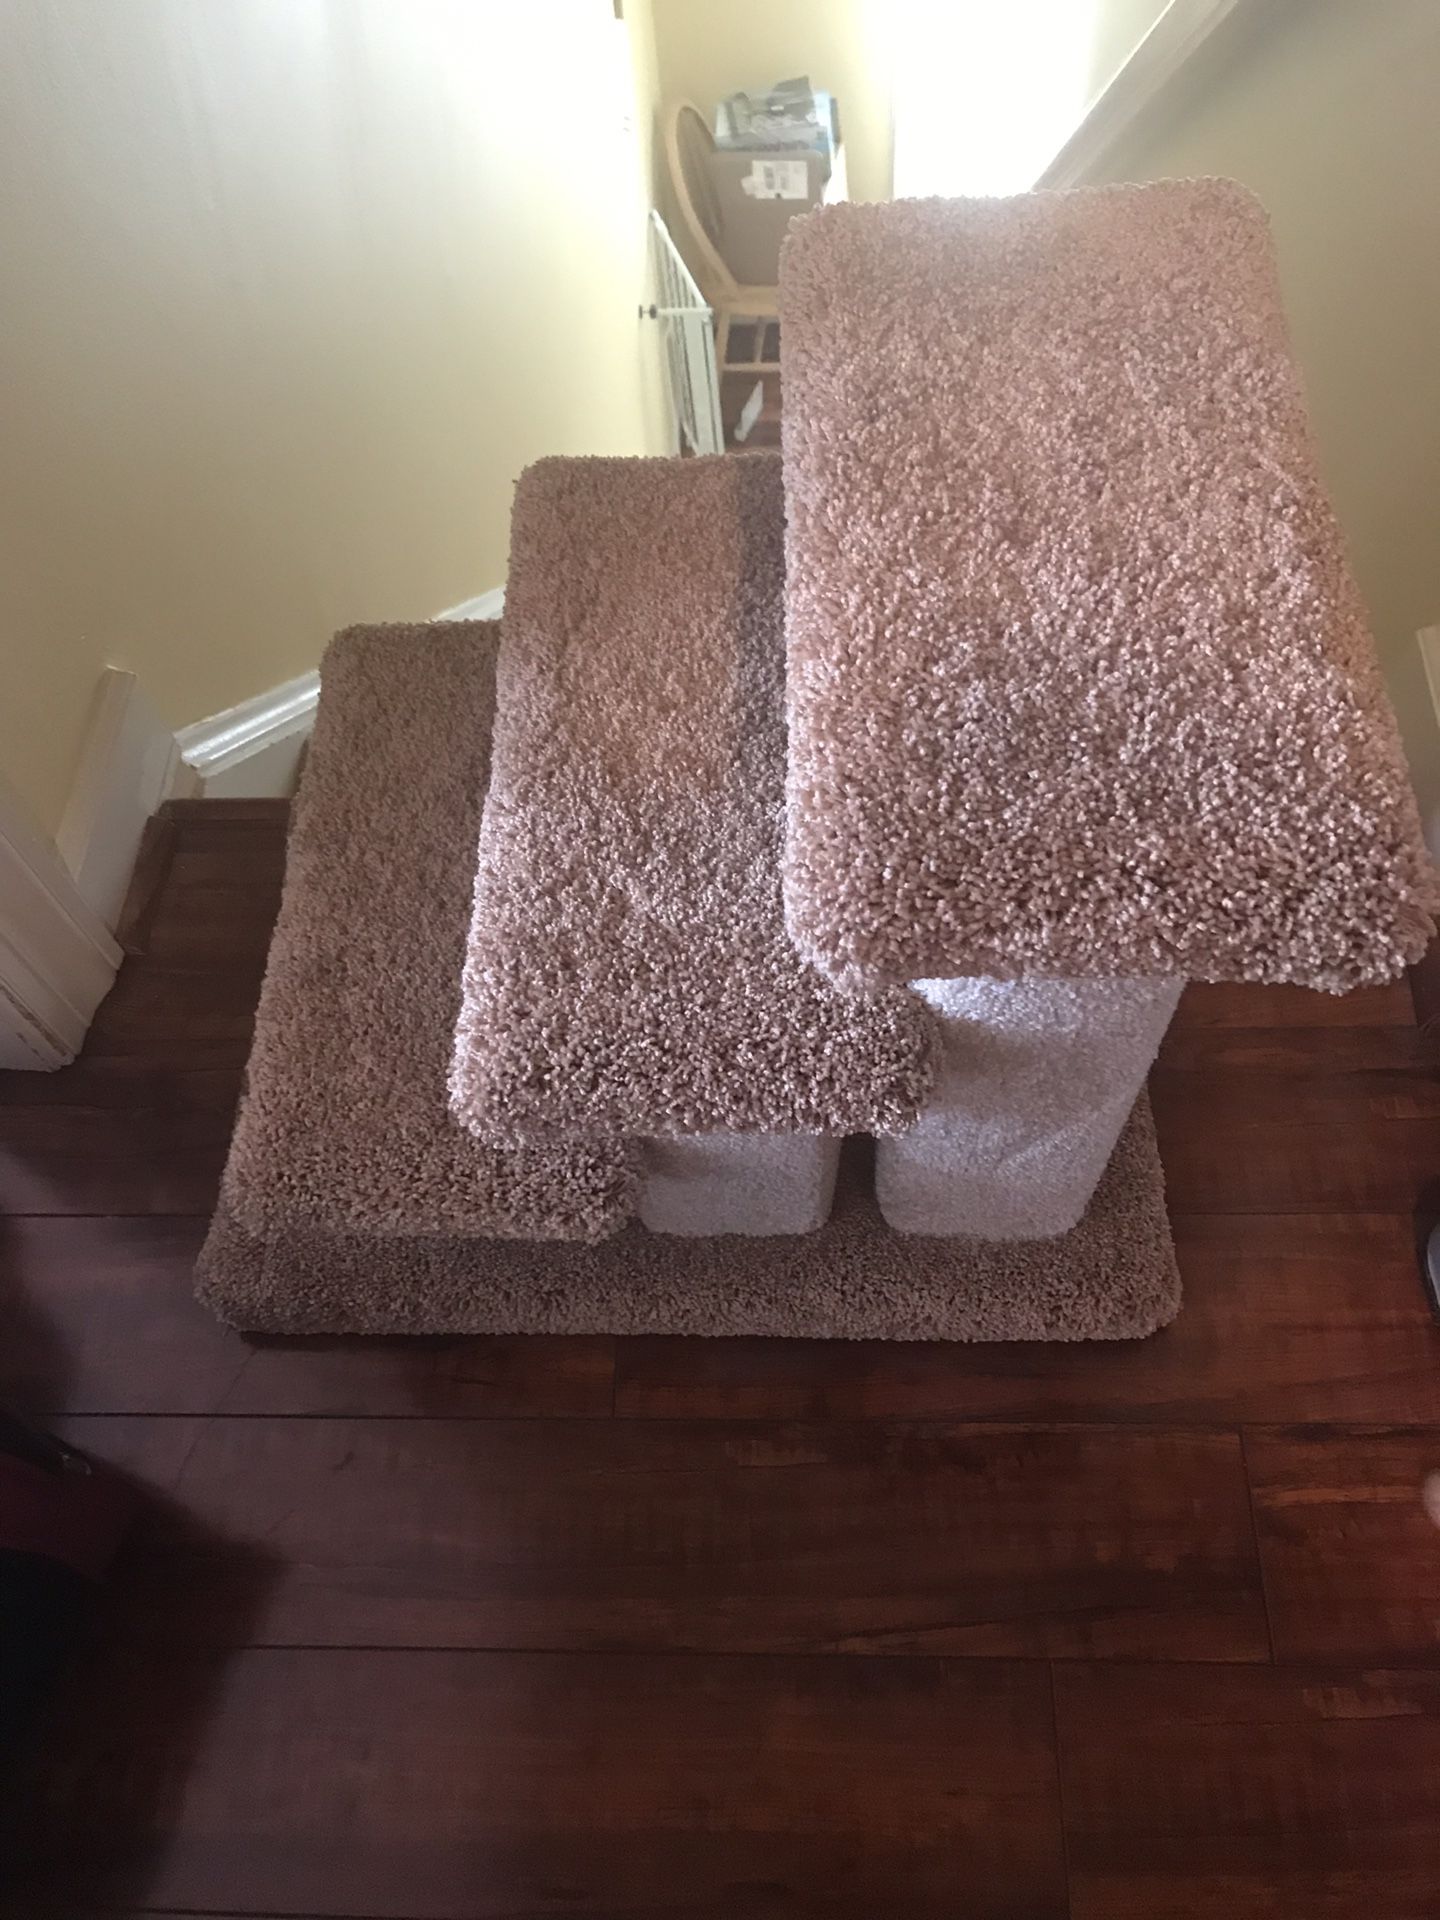 Dog stairs and bags